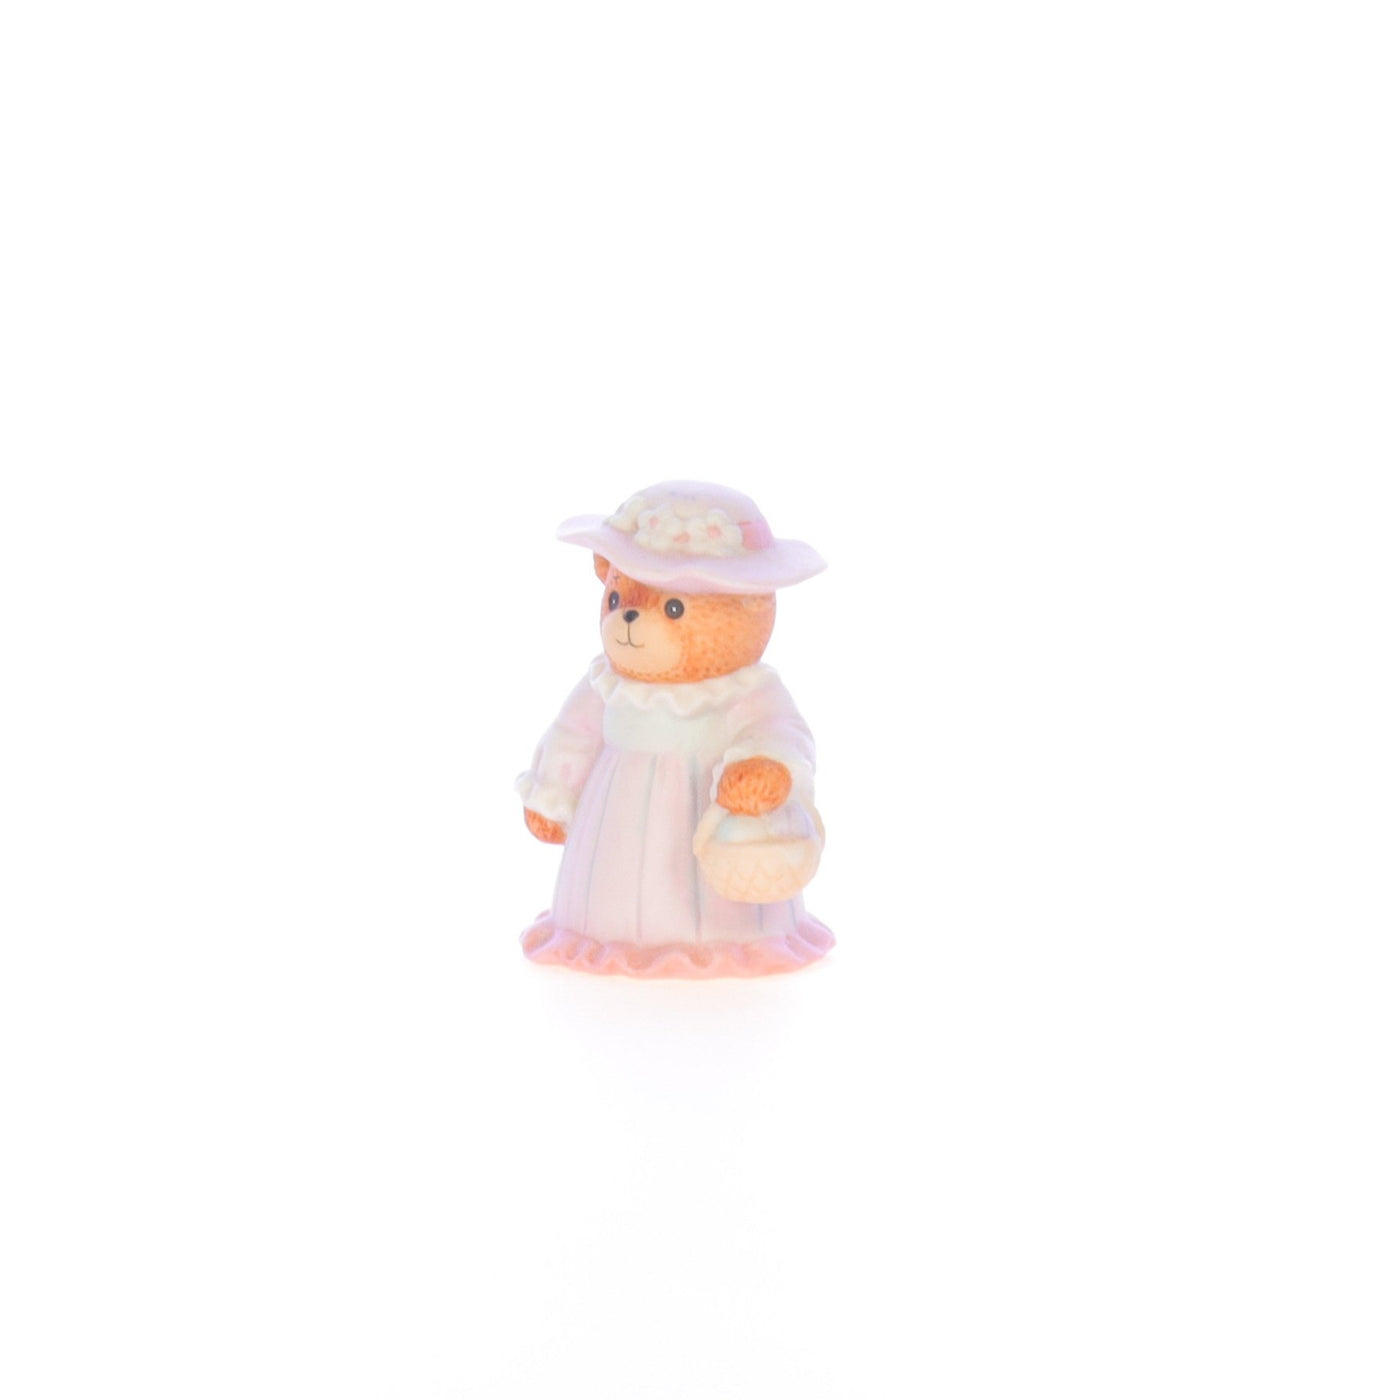 Lucy_And_Me_by_Lucy_Atwell_Porcelain_Figurine_Girl_Bear_with_Easter_Egg_Bakset_Lucy_Unknown_047_02